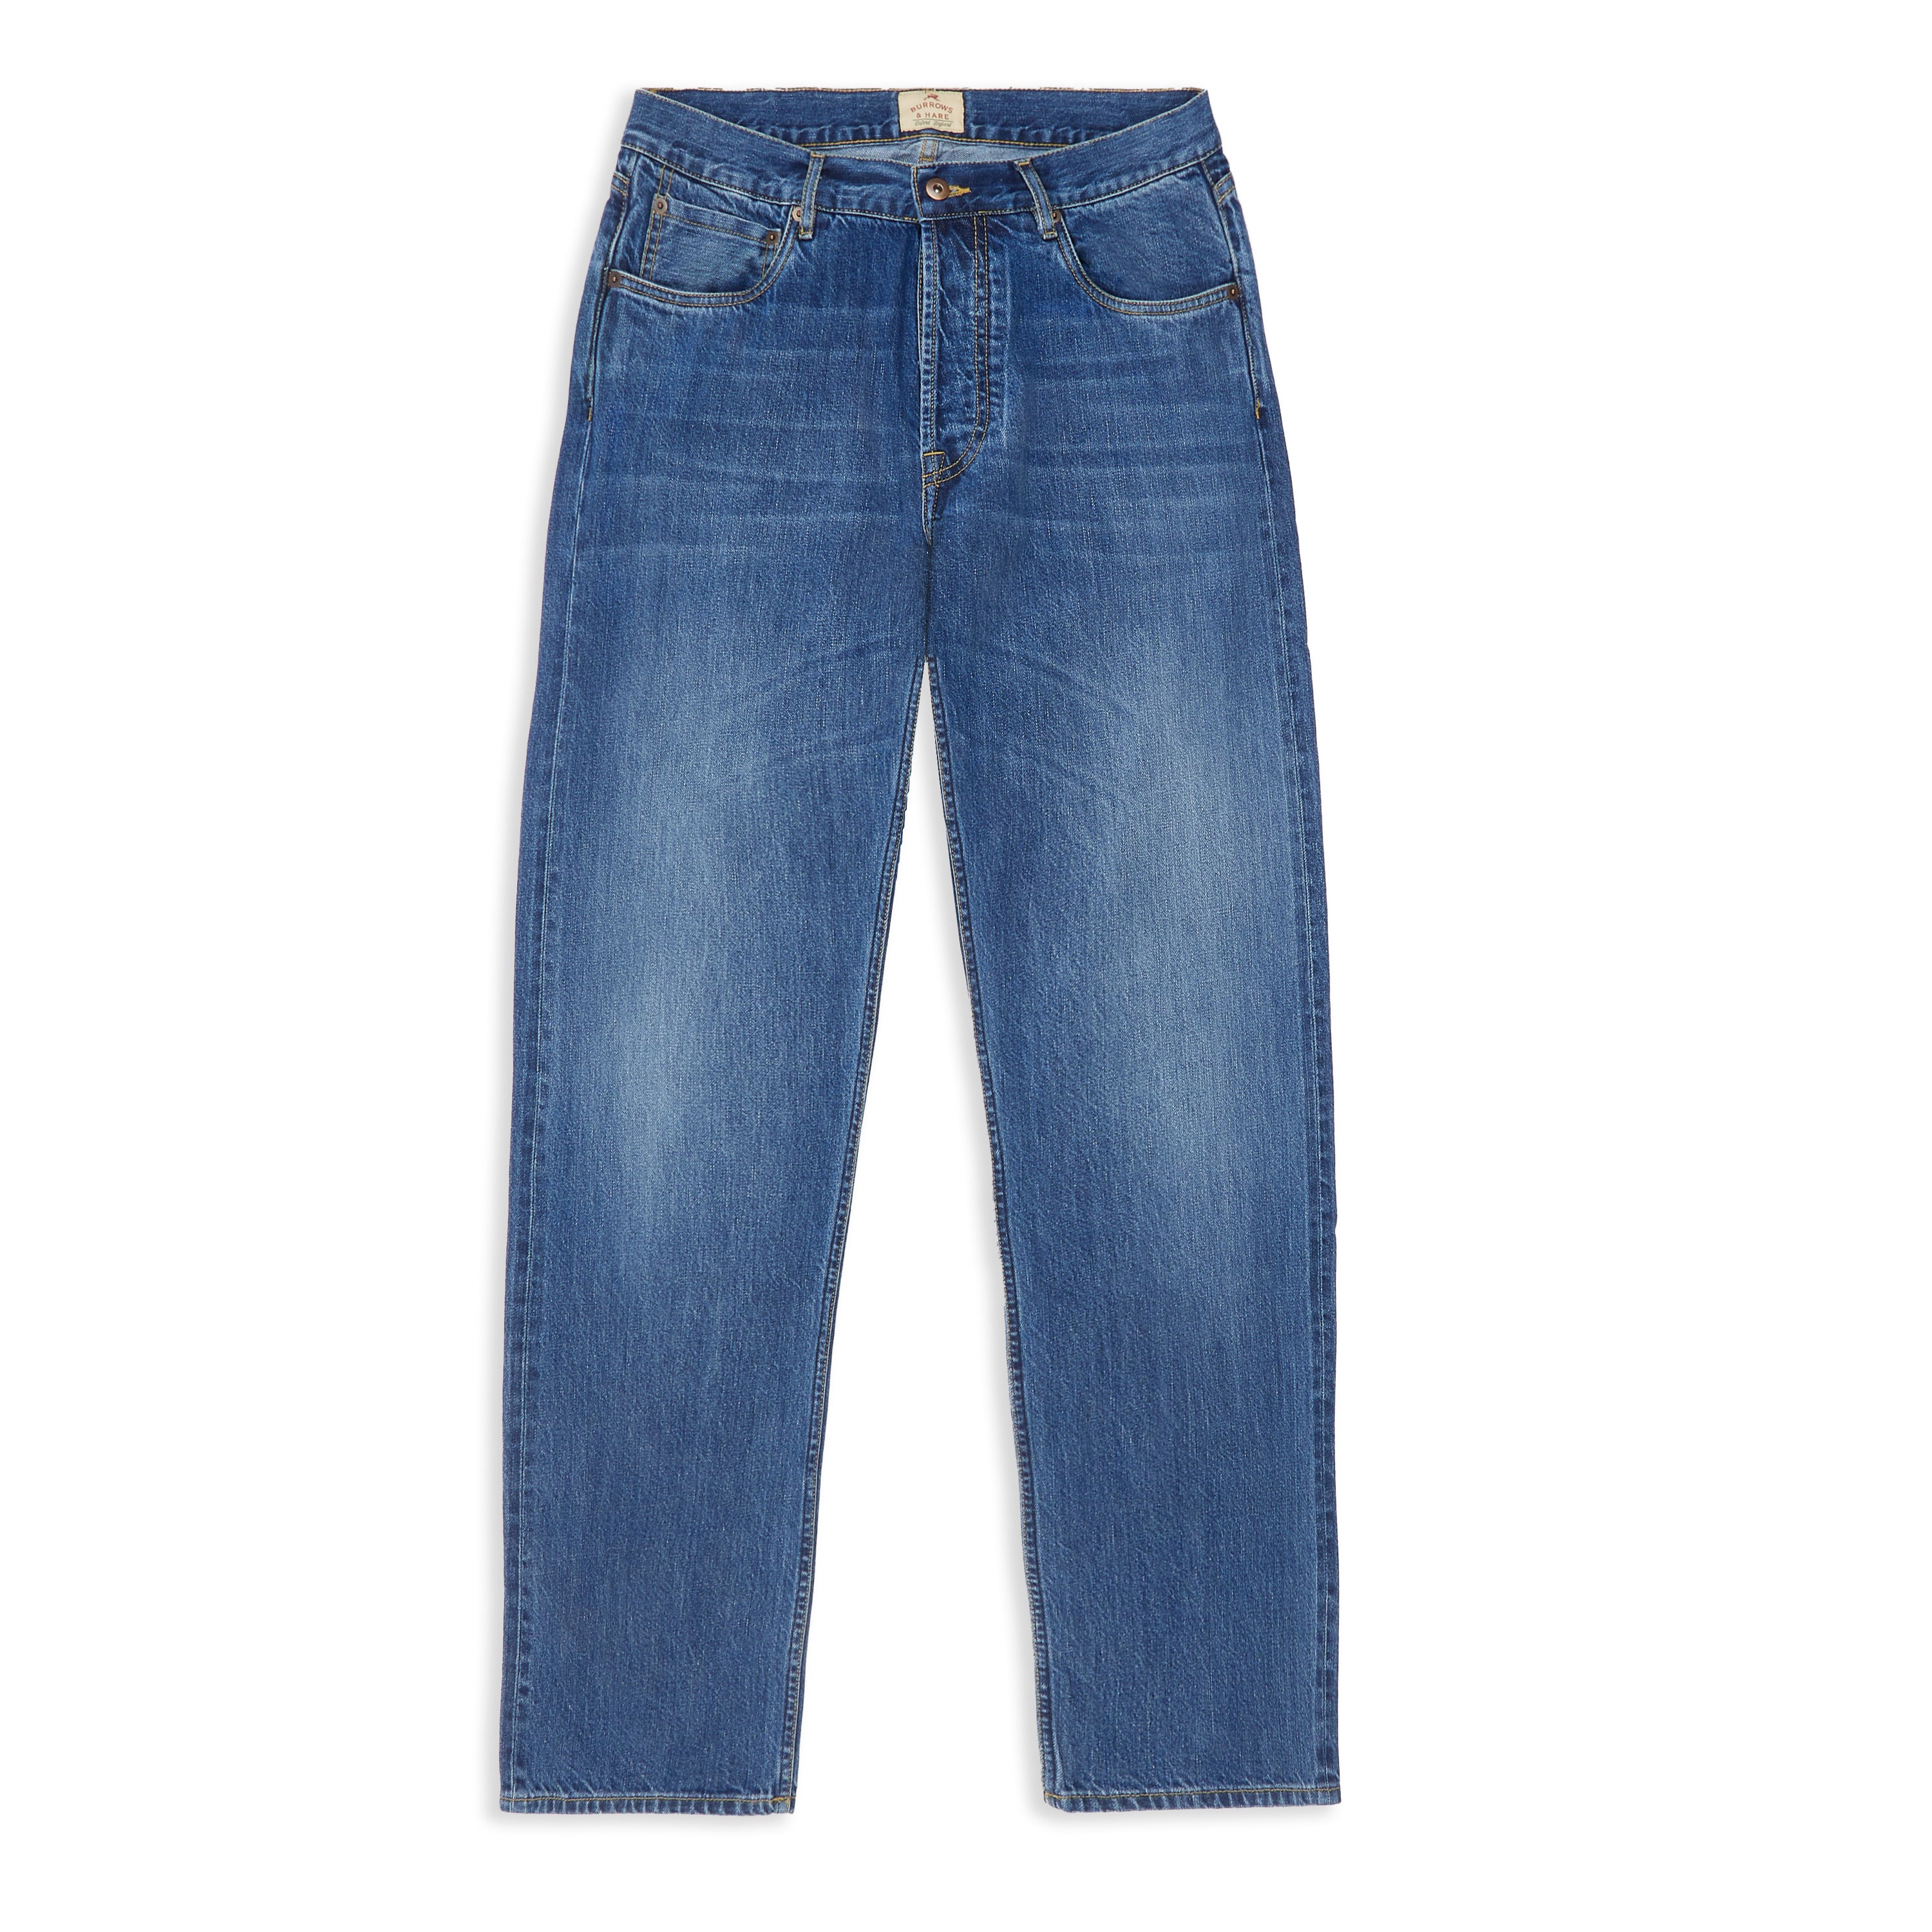 Burrows & Hare  Straight Jeans - Stone Wash